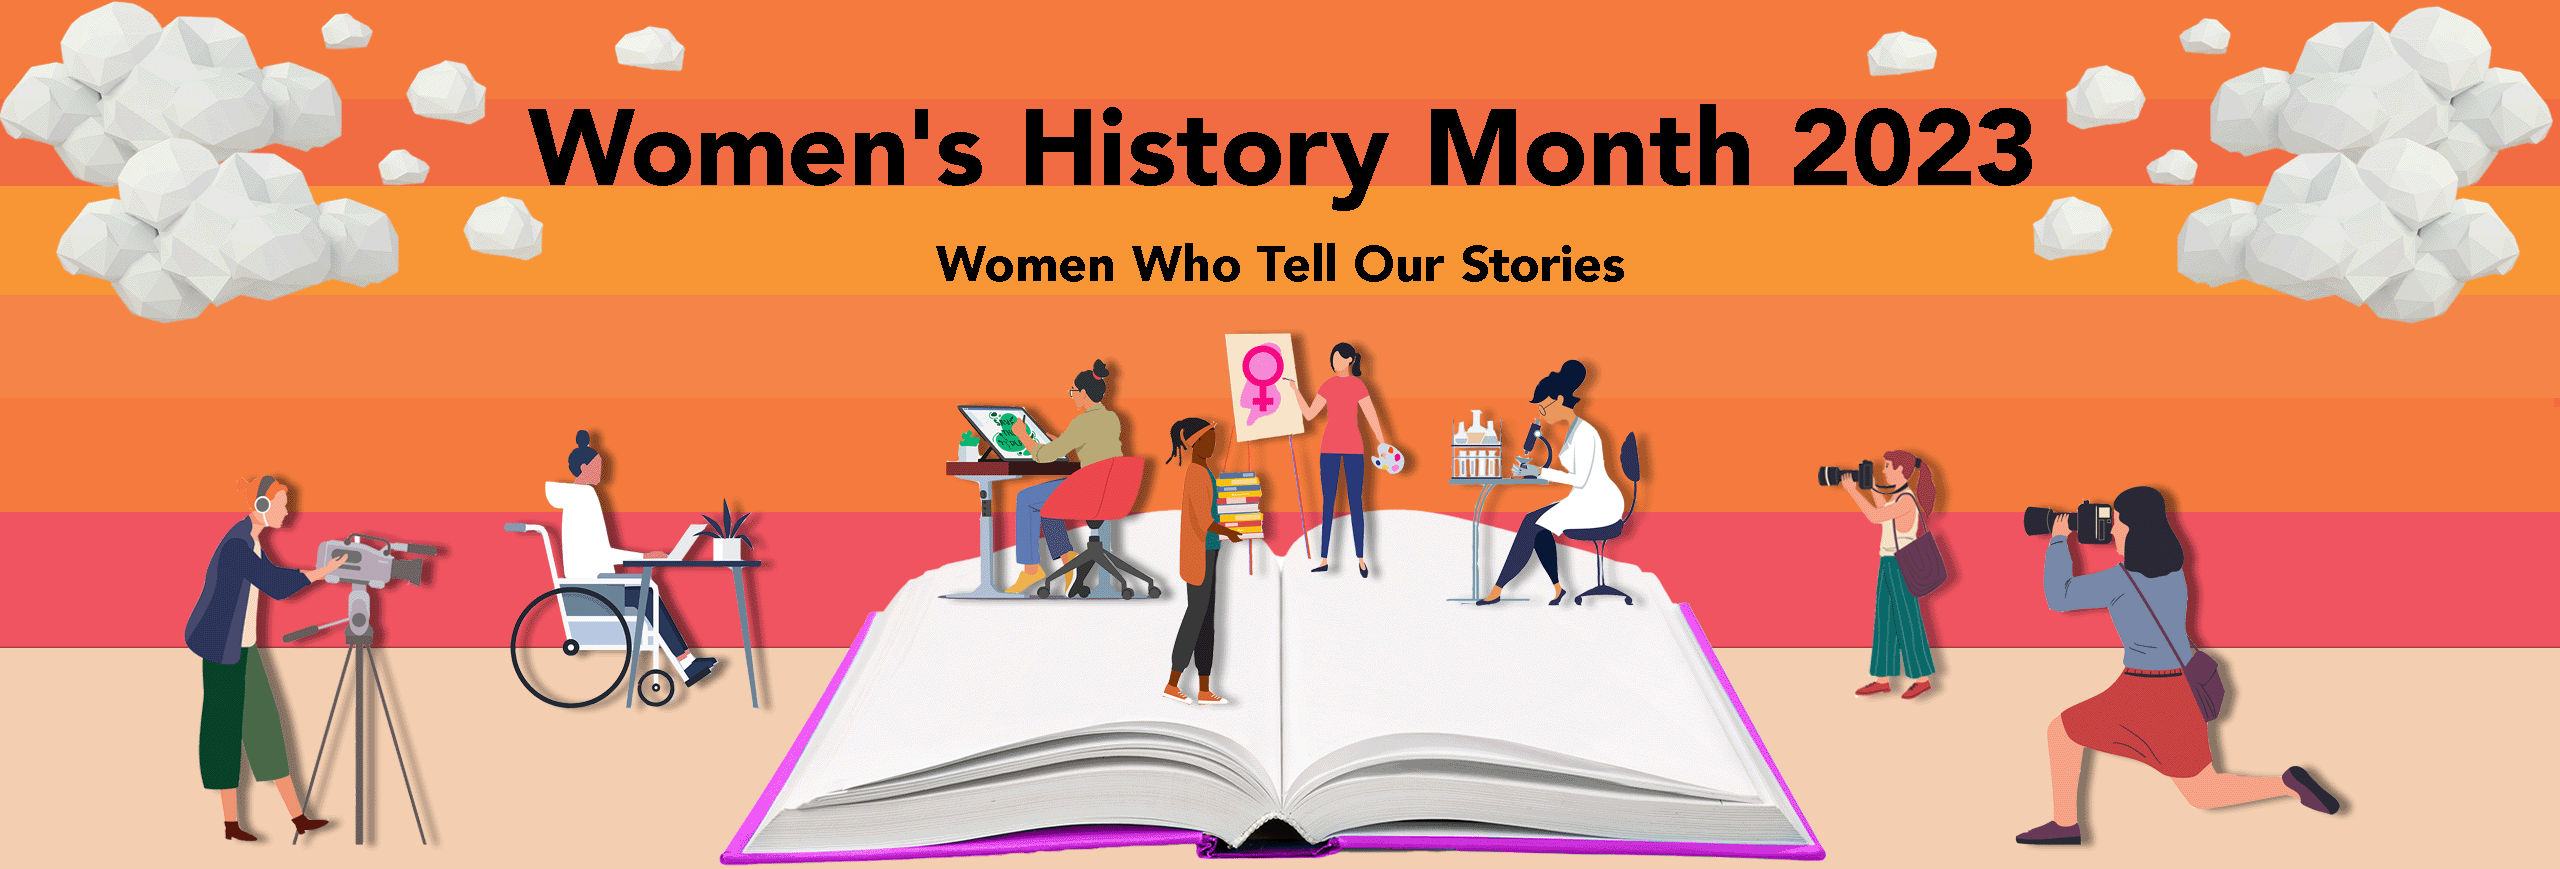 Women’s History Month collage of a pop-up book with small vector images of women creating art, writing stories, capturing photos, researching, recording, and carrying books.